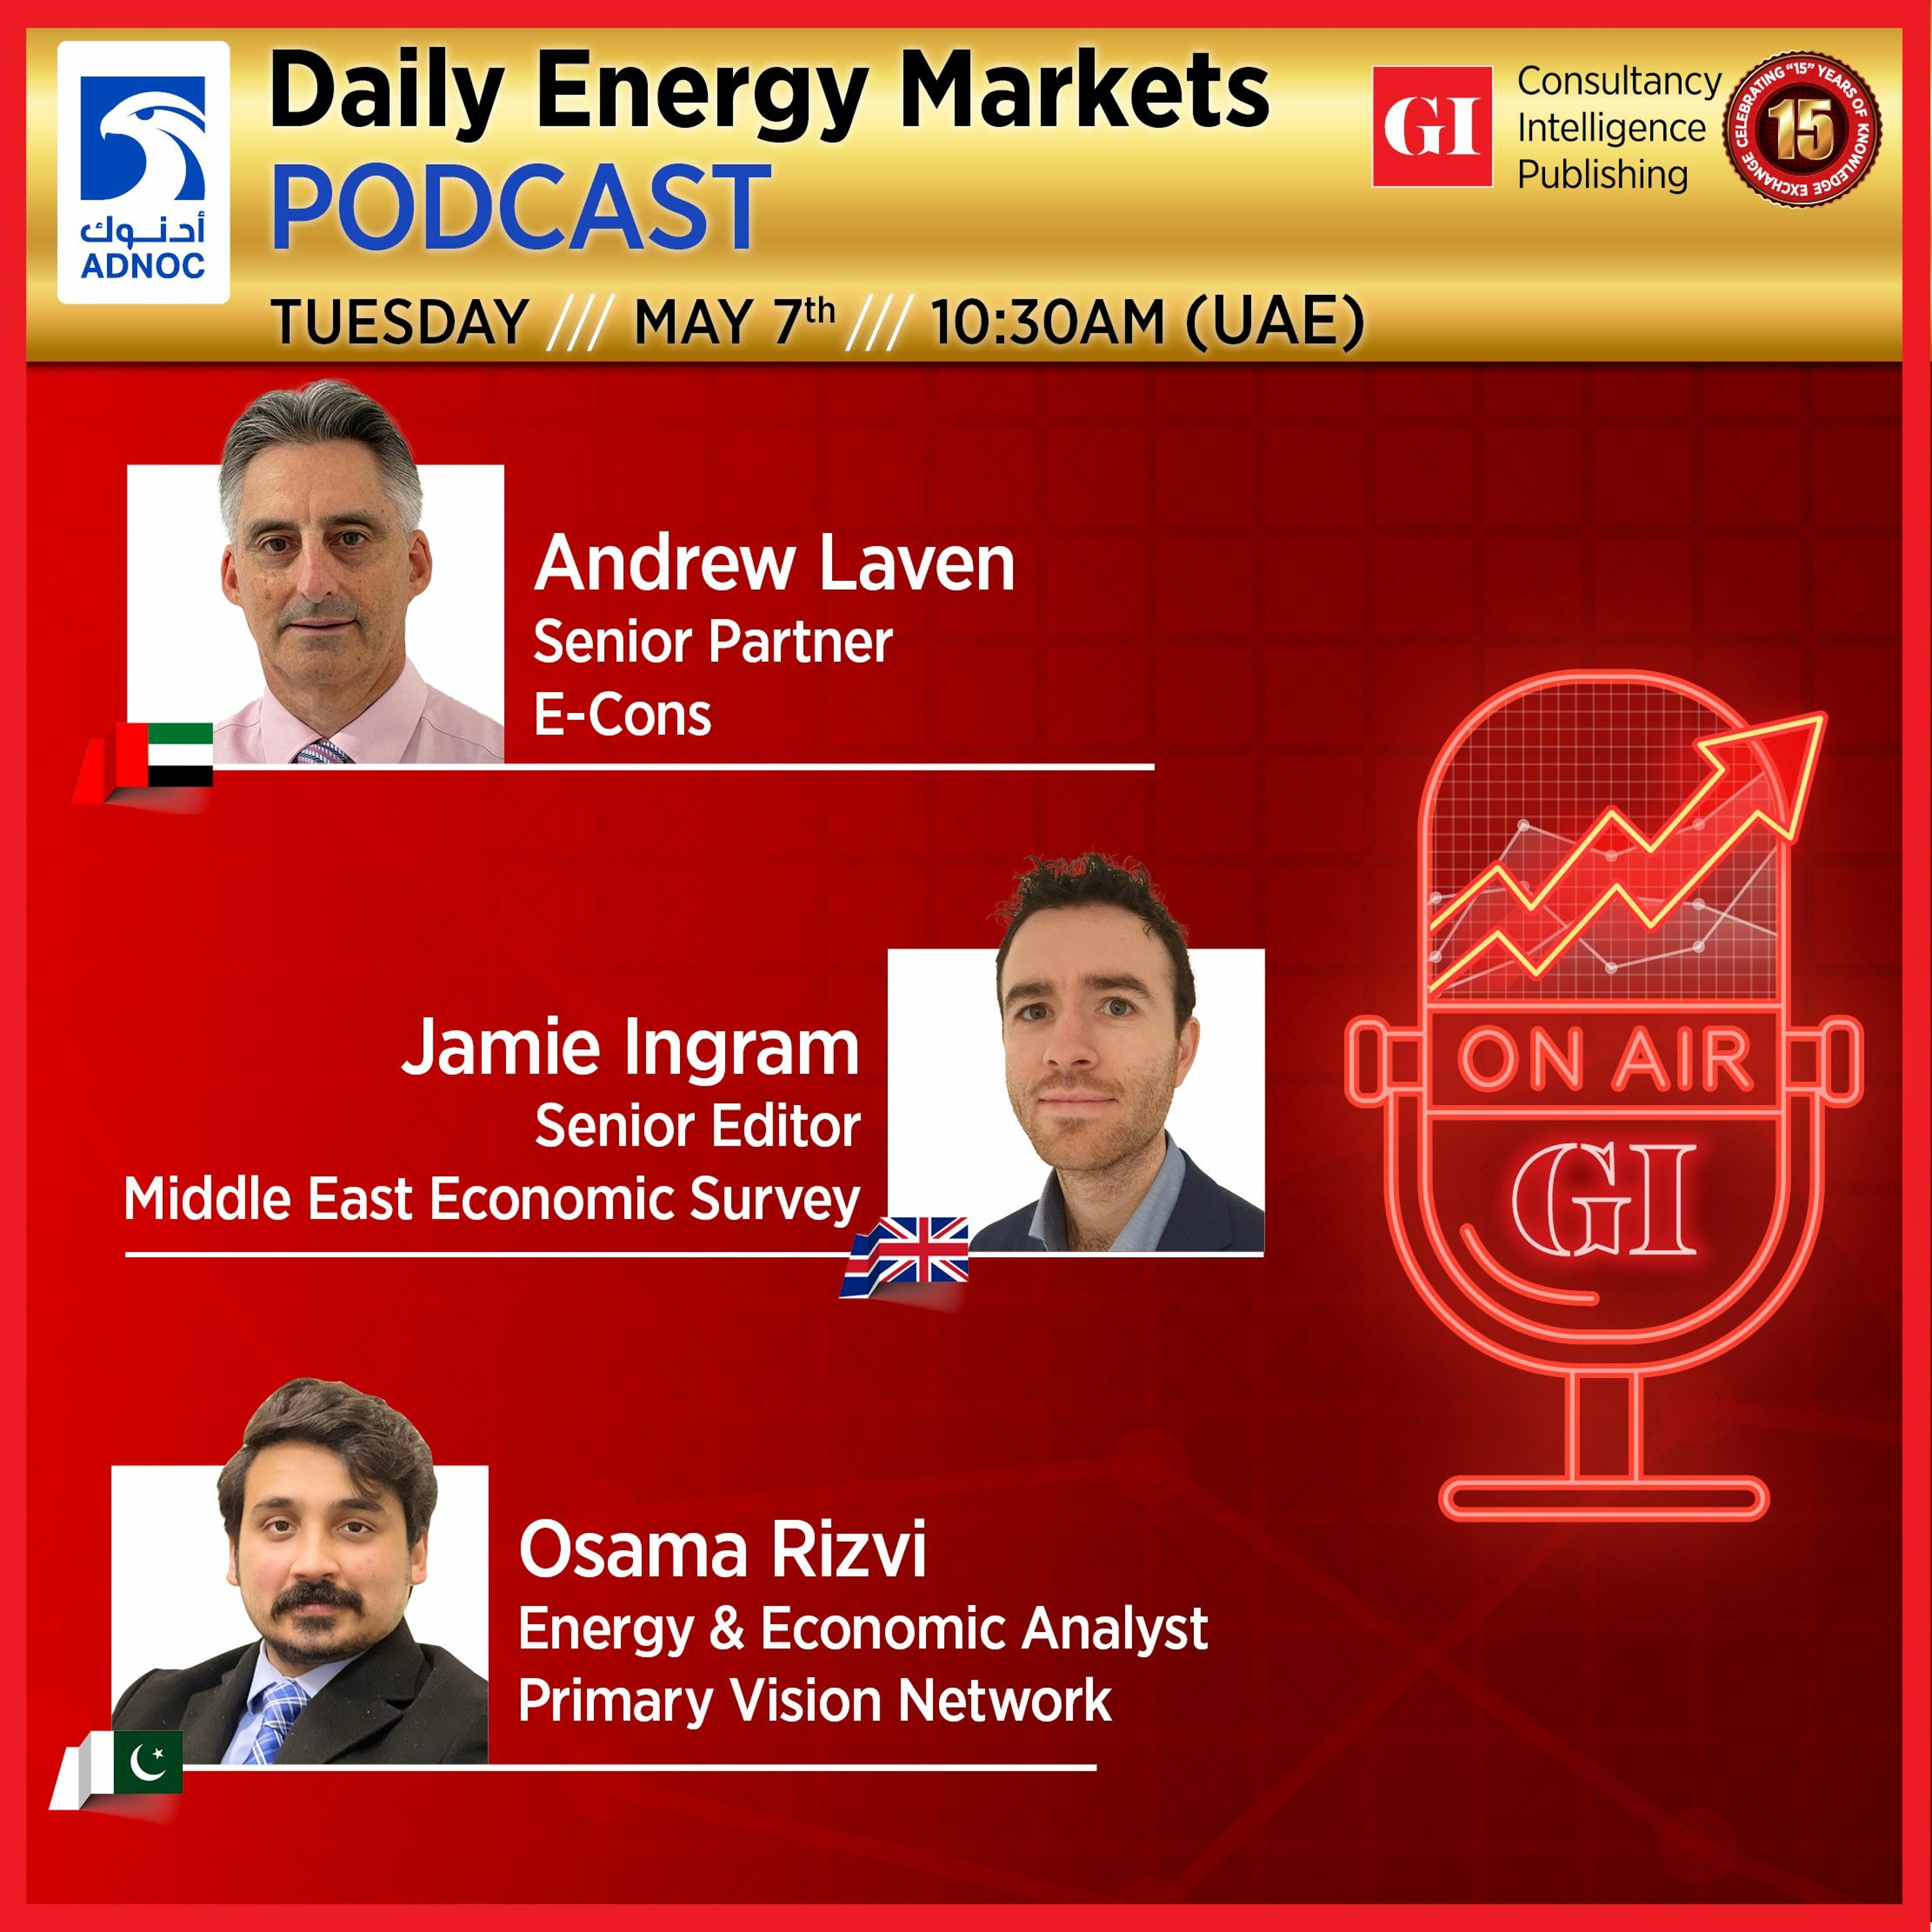 PODCAST: Daily Energy Markets - May 7th